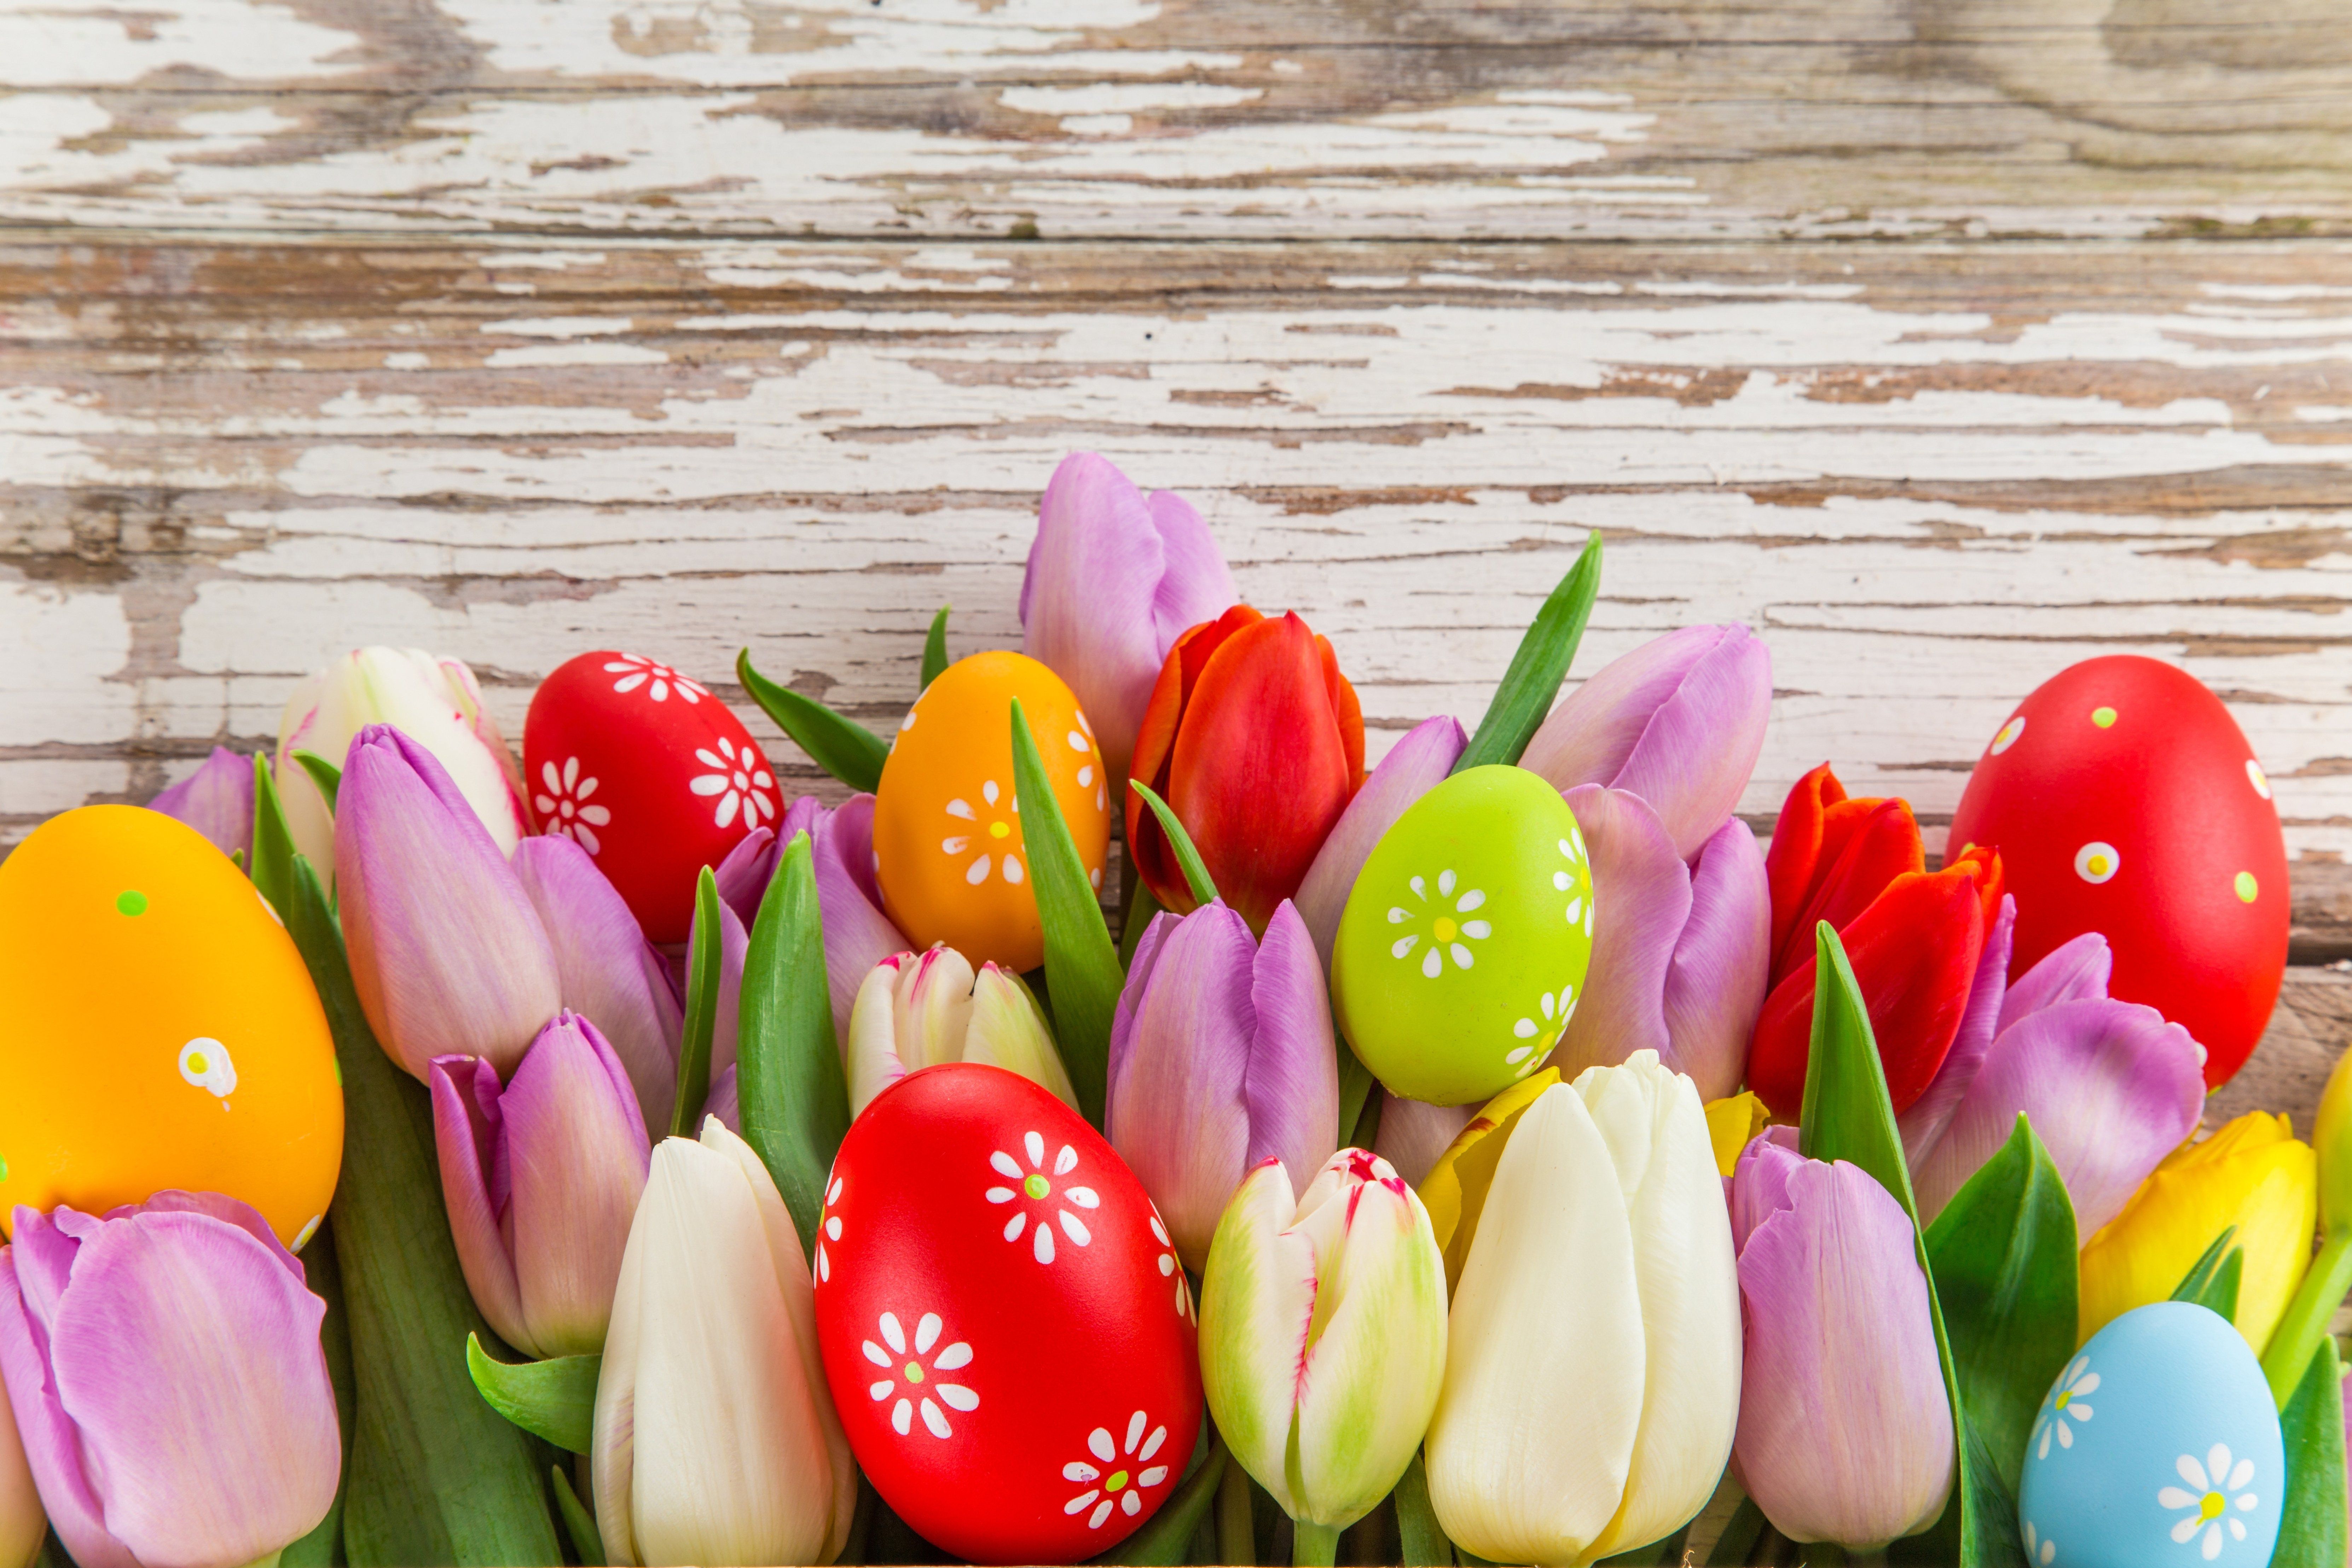 Free Easter Desktop Backgrounds posted by John Tremblay